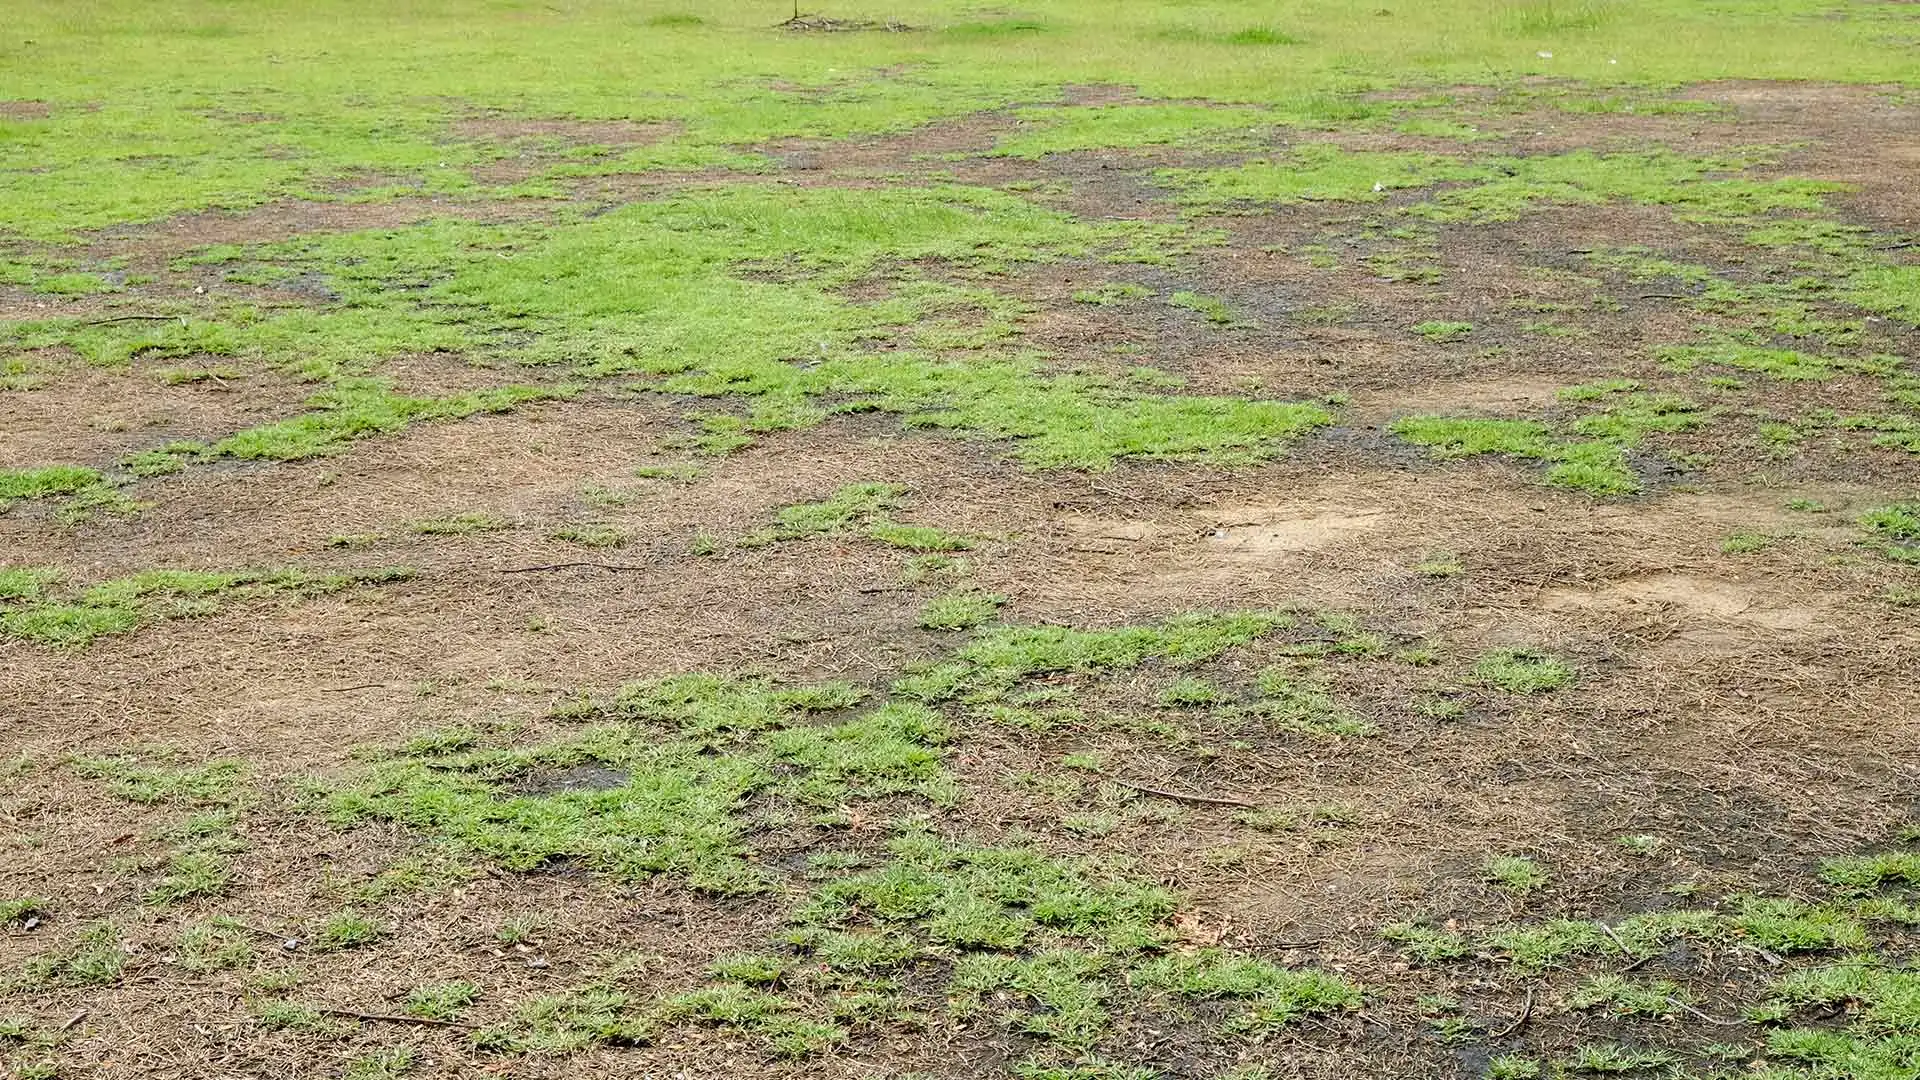 Can You Repair Your Brown Grass or Should You Replace It?